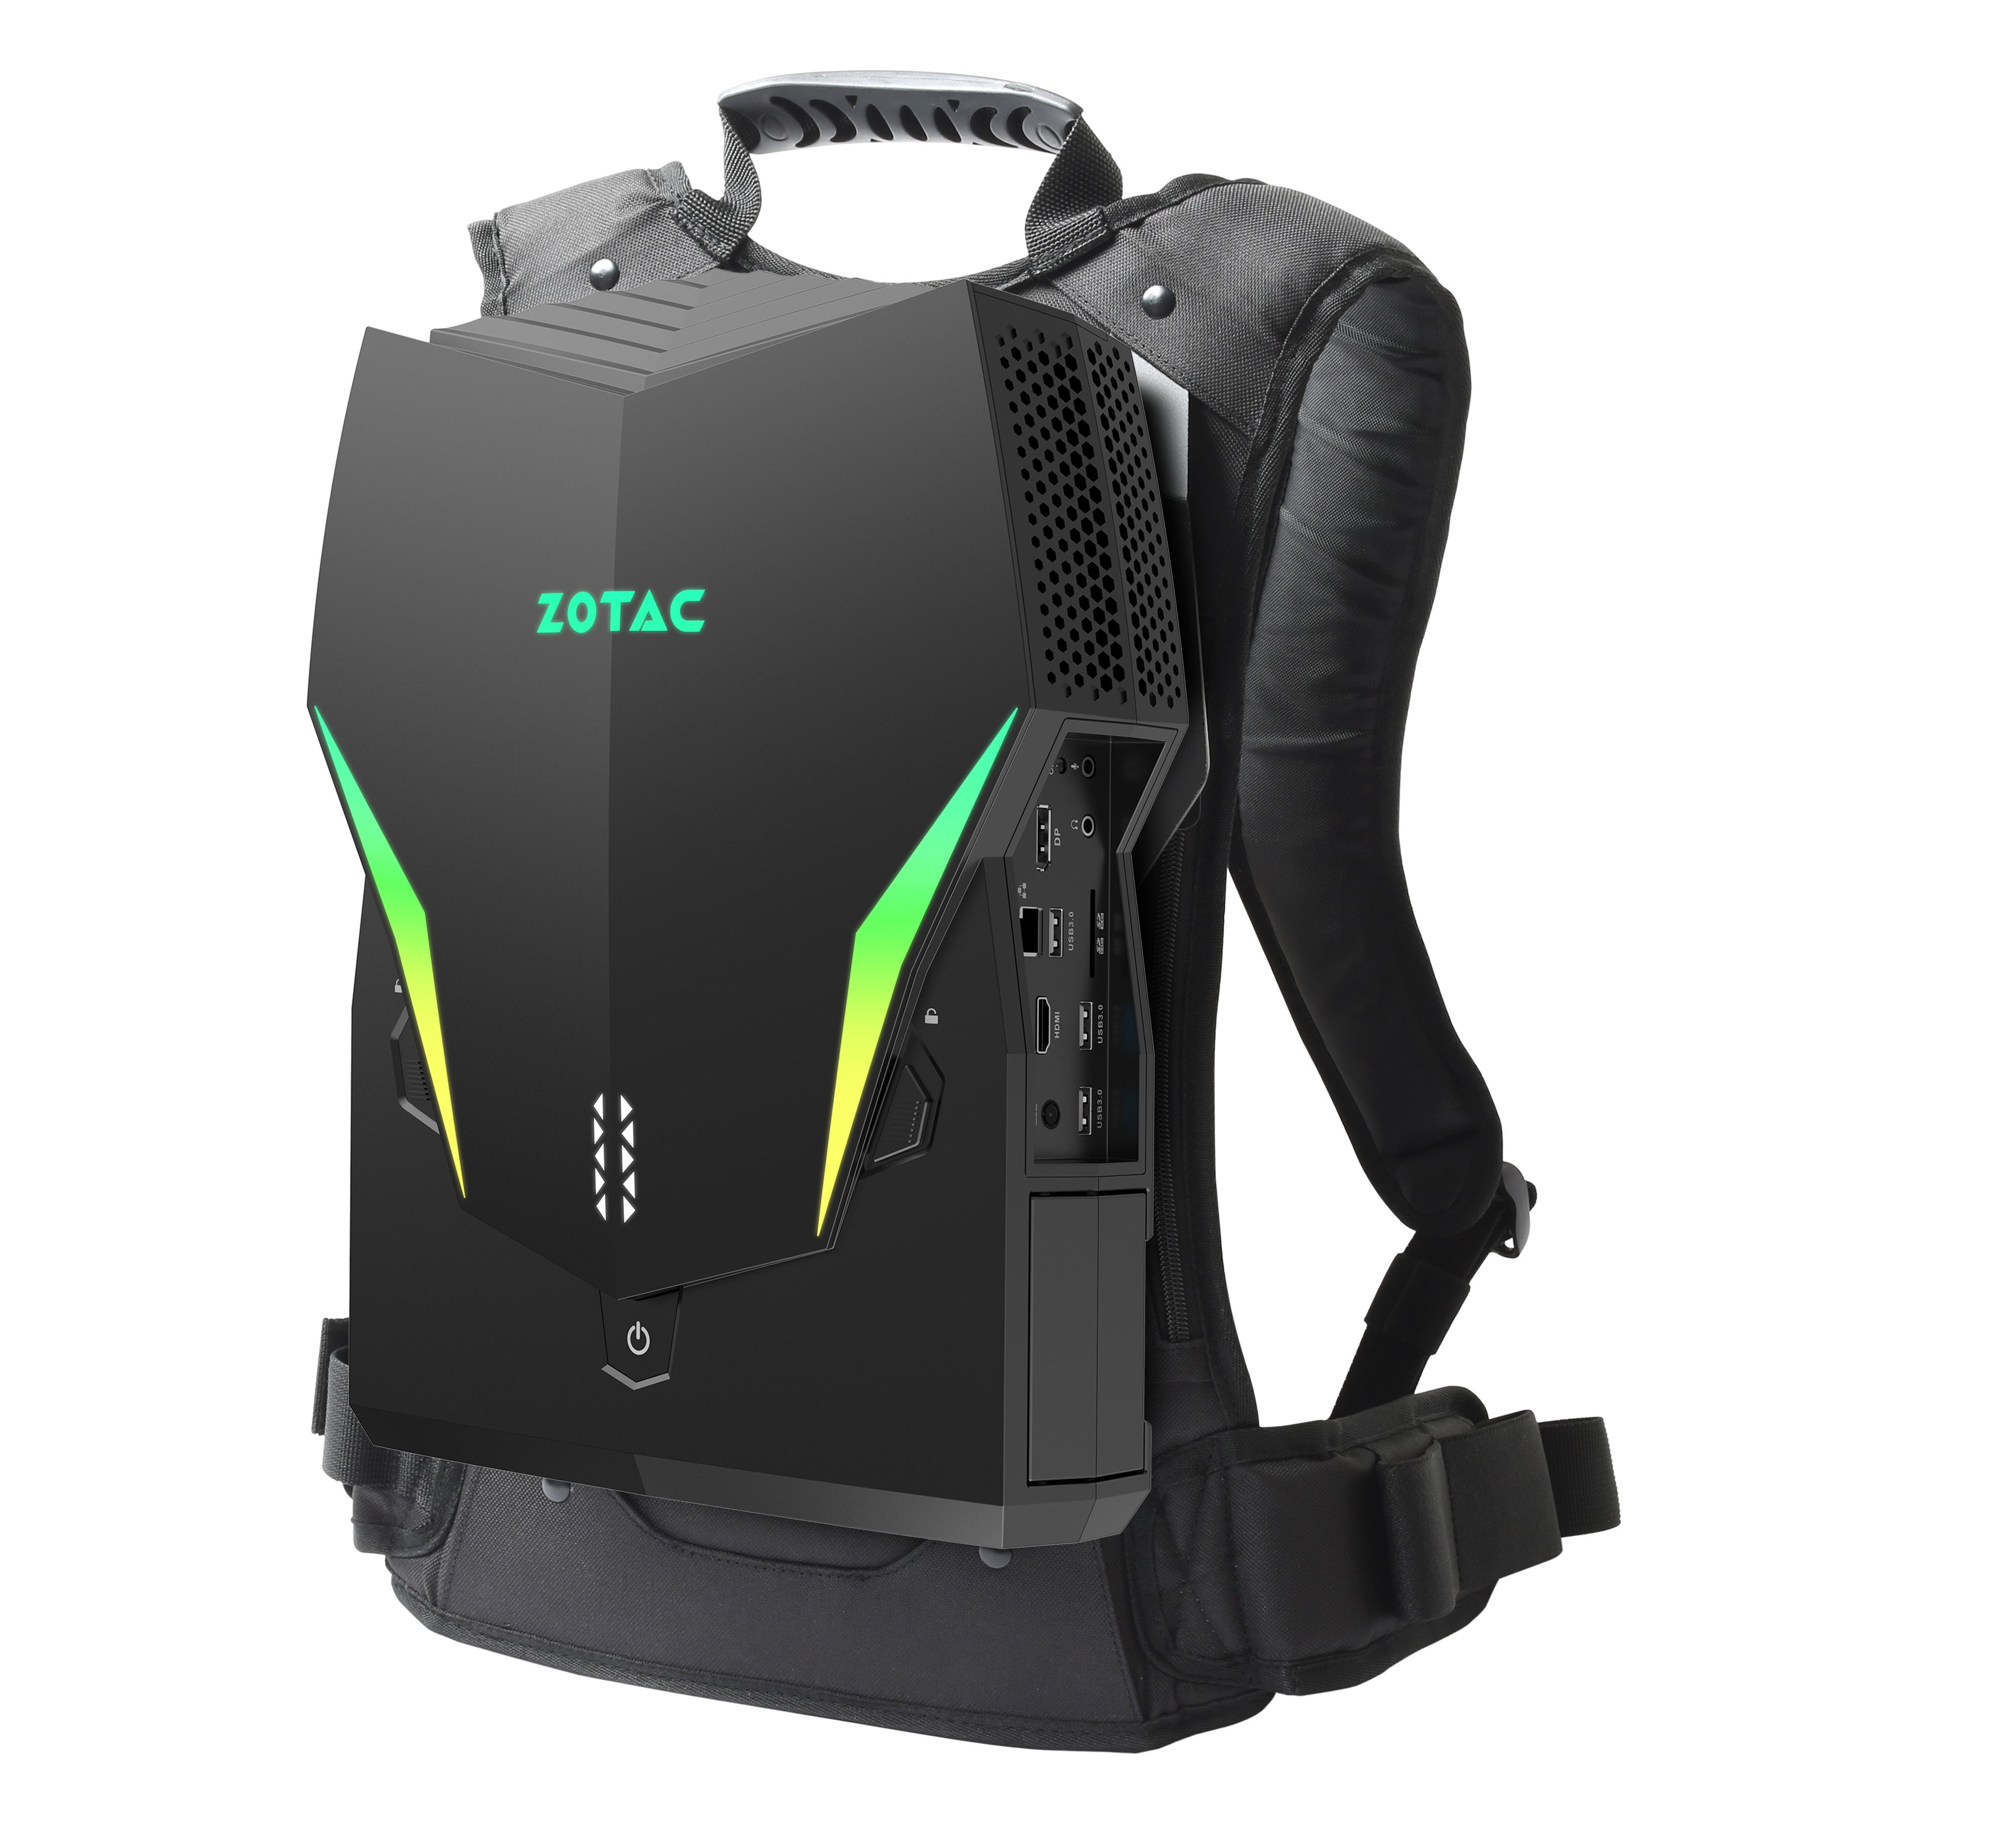 Van toepassing zijn Telemacos cache RTX OTG: Zotac's VR GO backpack PC gets an RTX upgrade - NotebookCheck.net  News